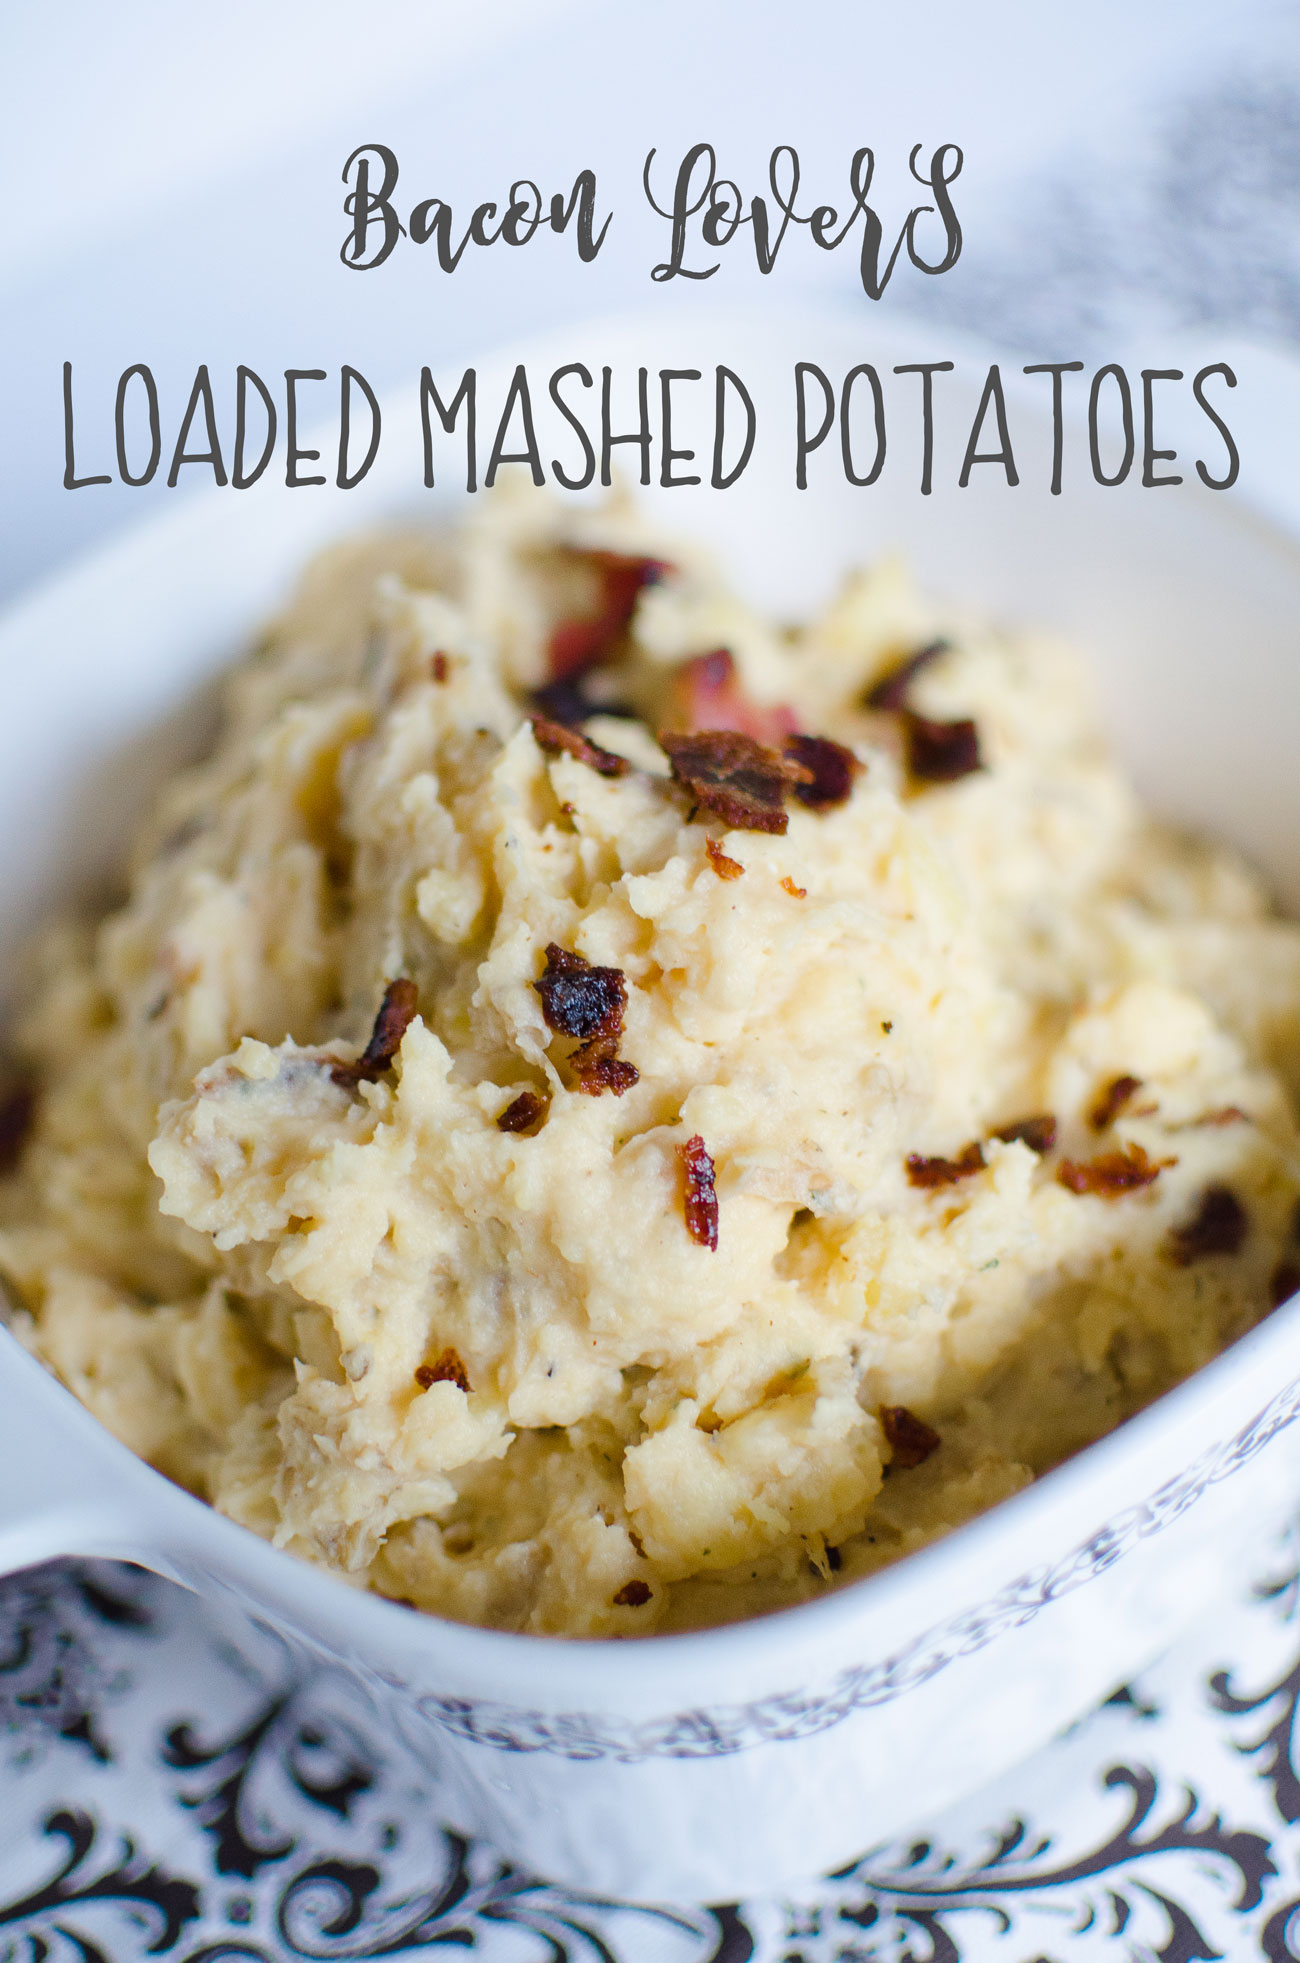 Bacon Lovers Loaded Mashed Potatoes RECIPE